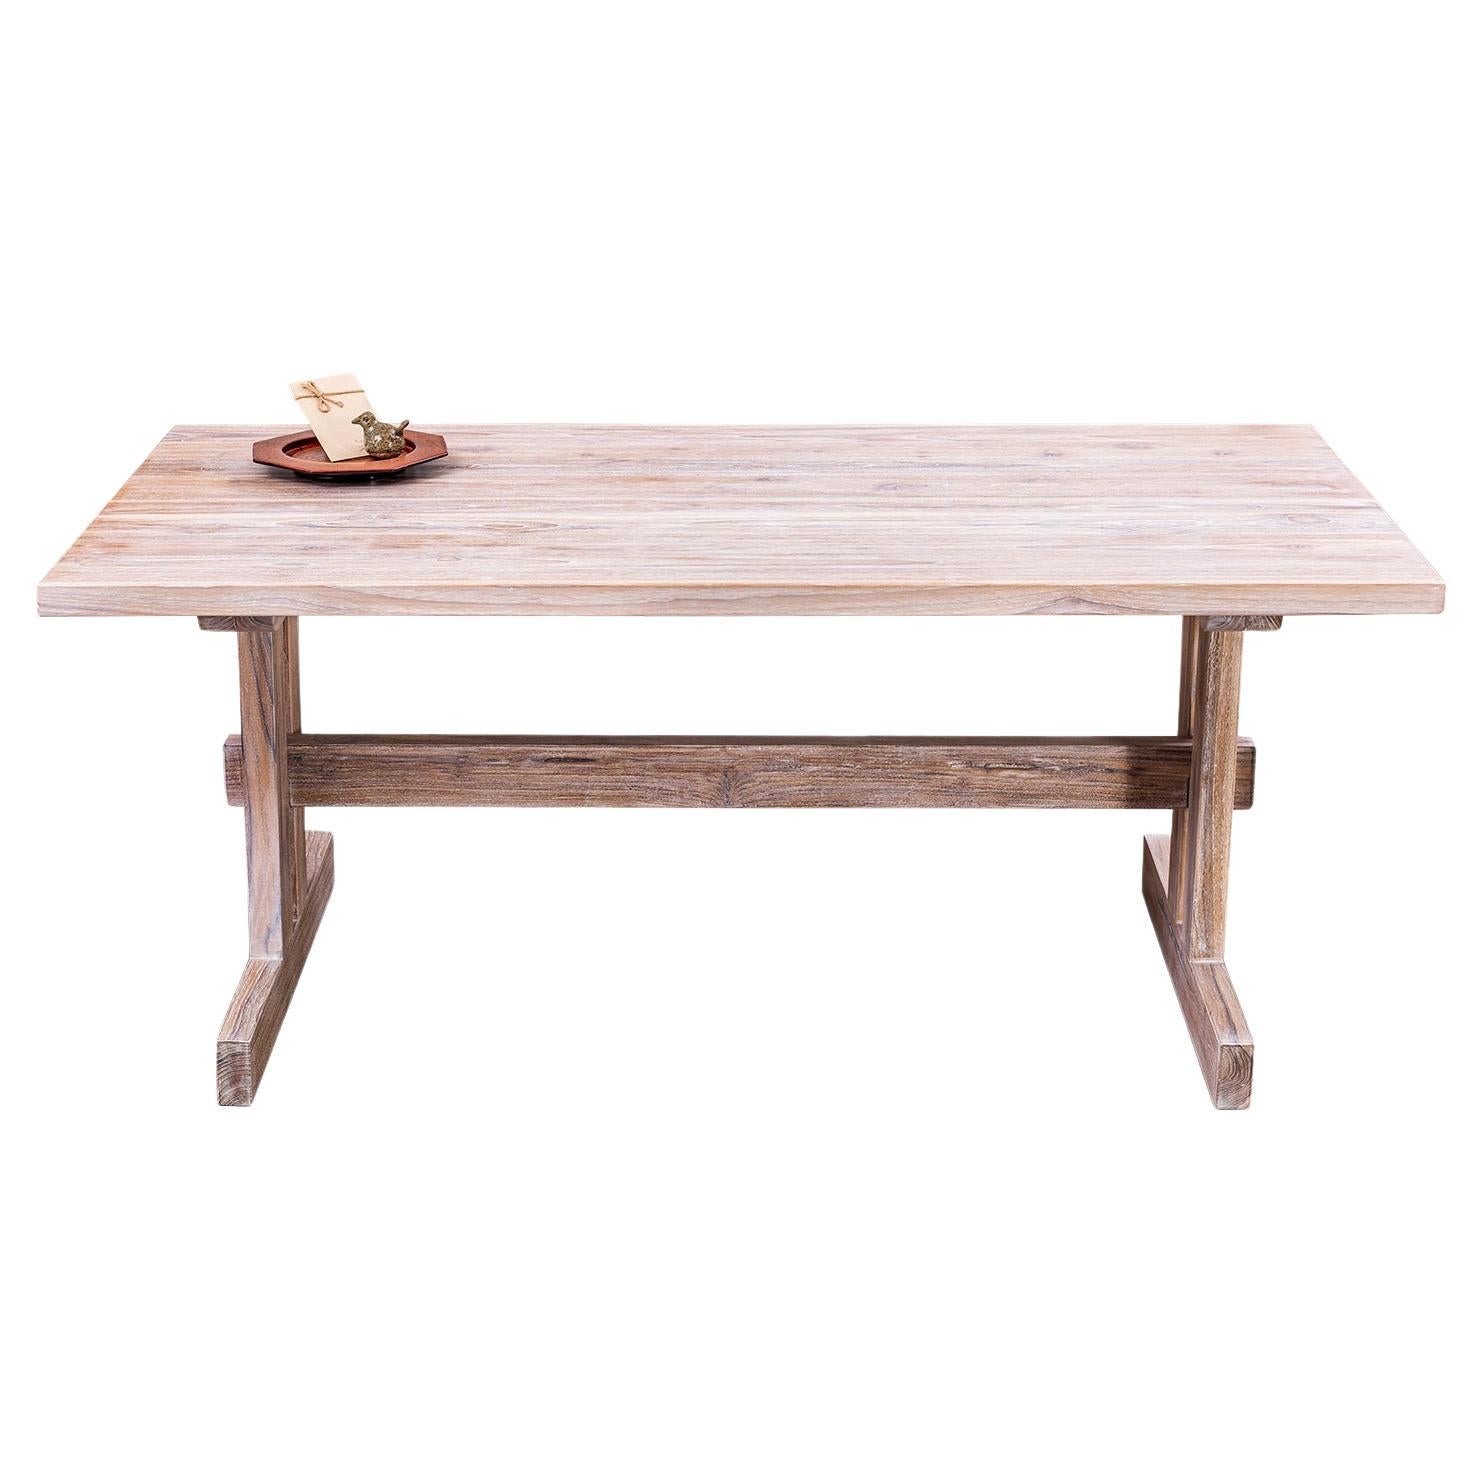 Solid 2" Teak Modern Rustic Dining Table in Sandblasted Sun Bleached Finish For Sale